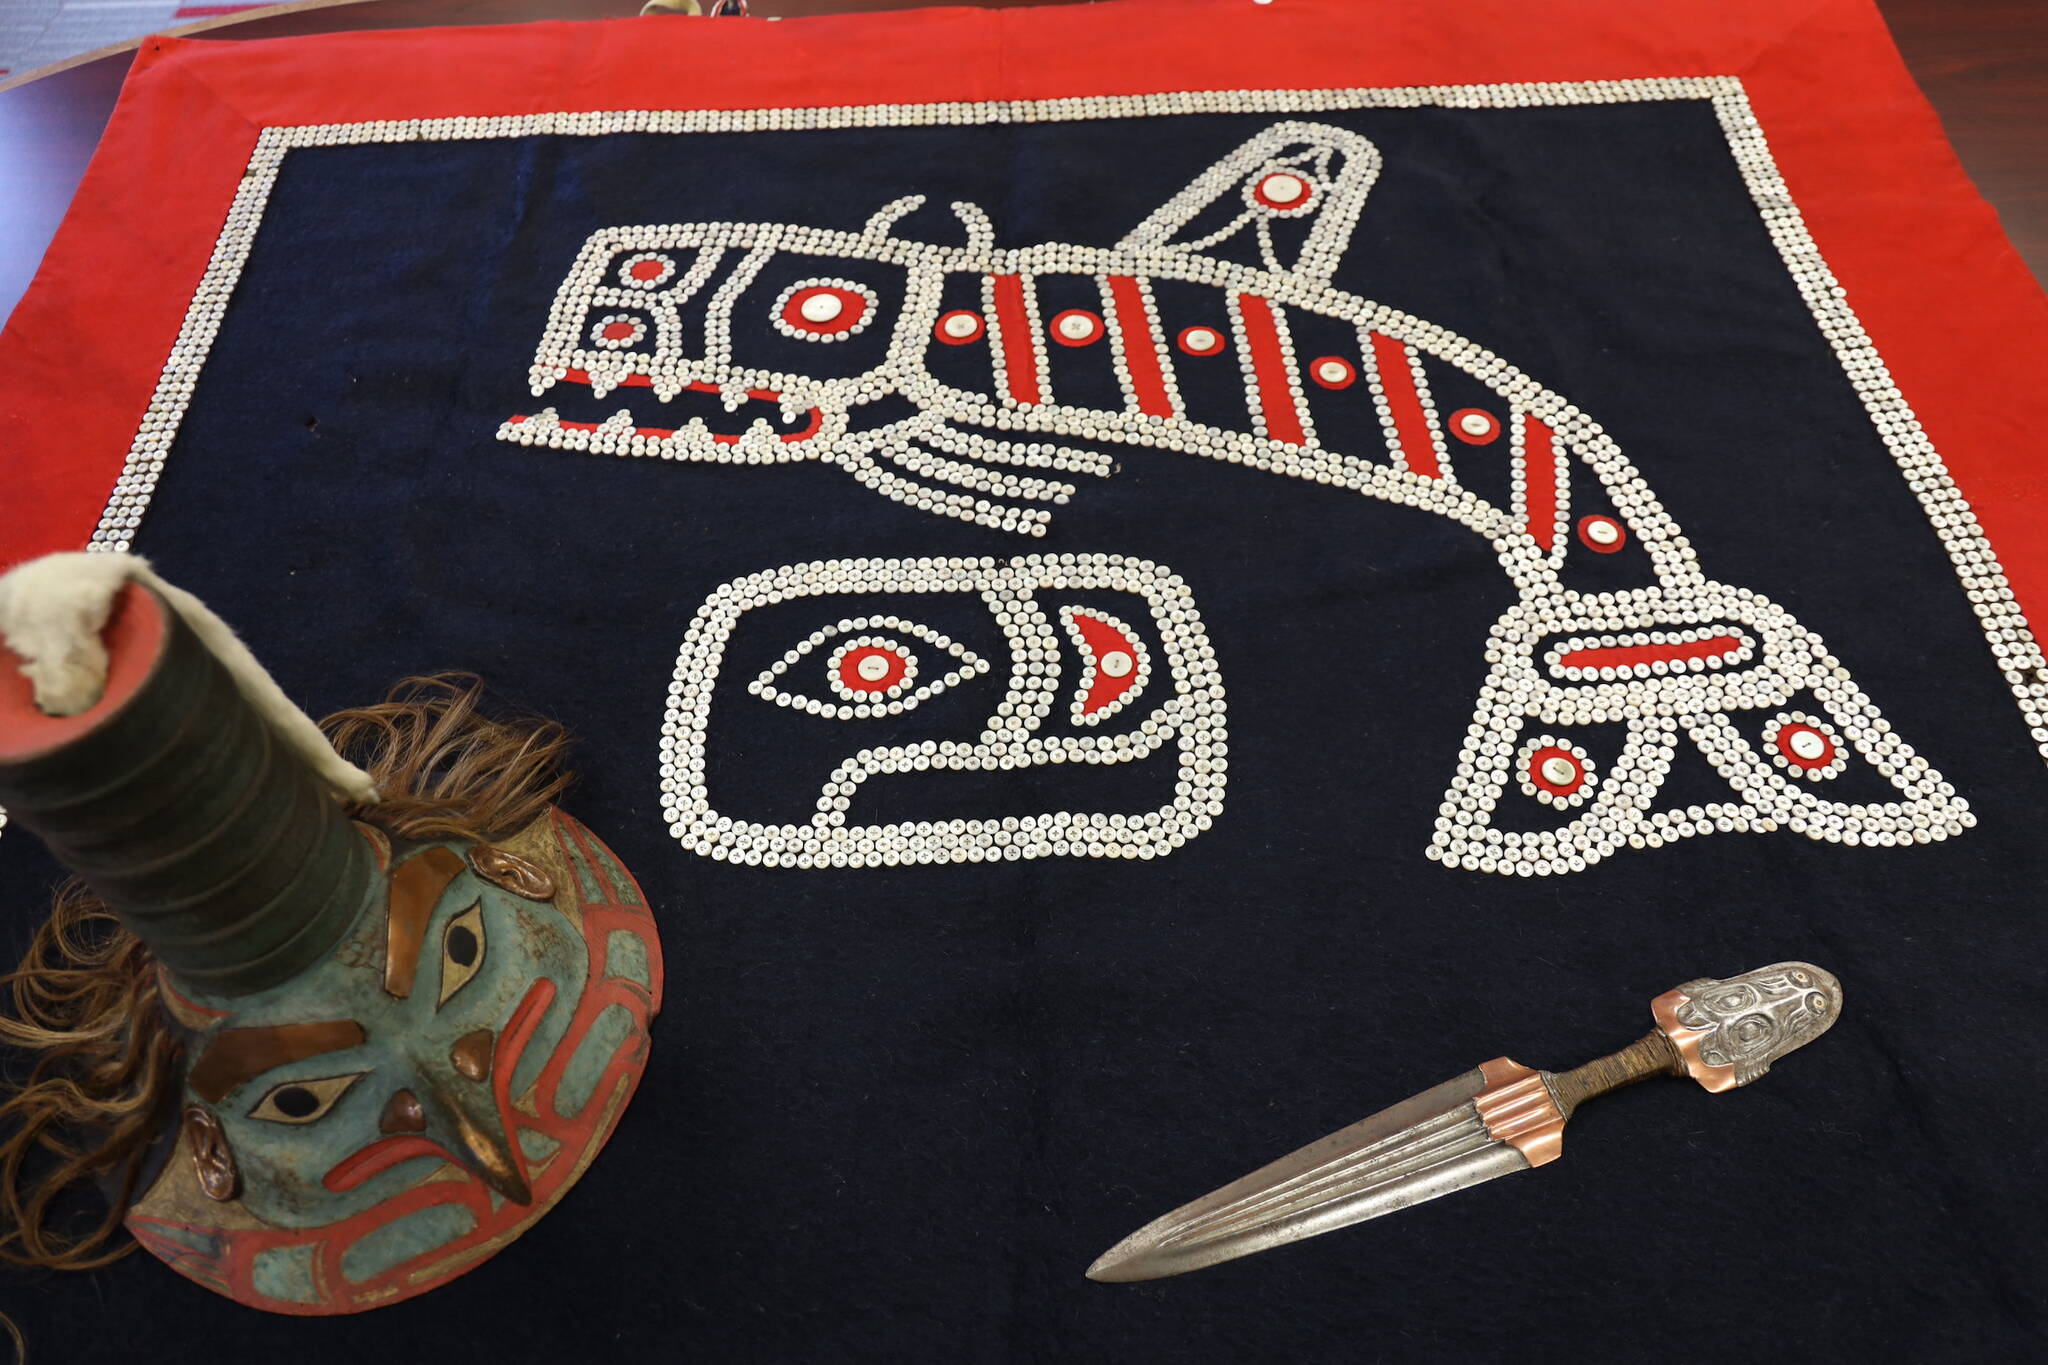 This photo taken in Juneau on Monday shows three items repatriated by the Central Council of the Tlingit and Haida Indian Tribes of Alaska. (Clarise Larson / Juneau Empire)